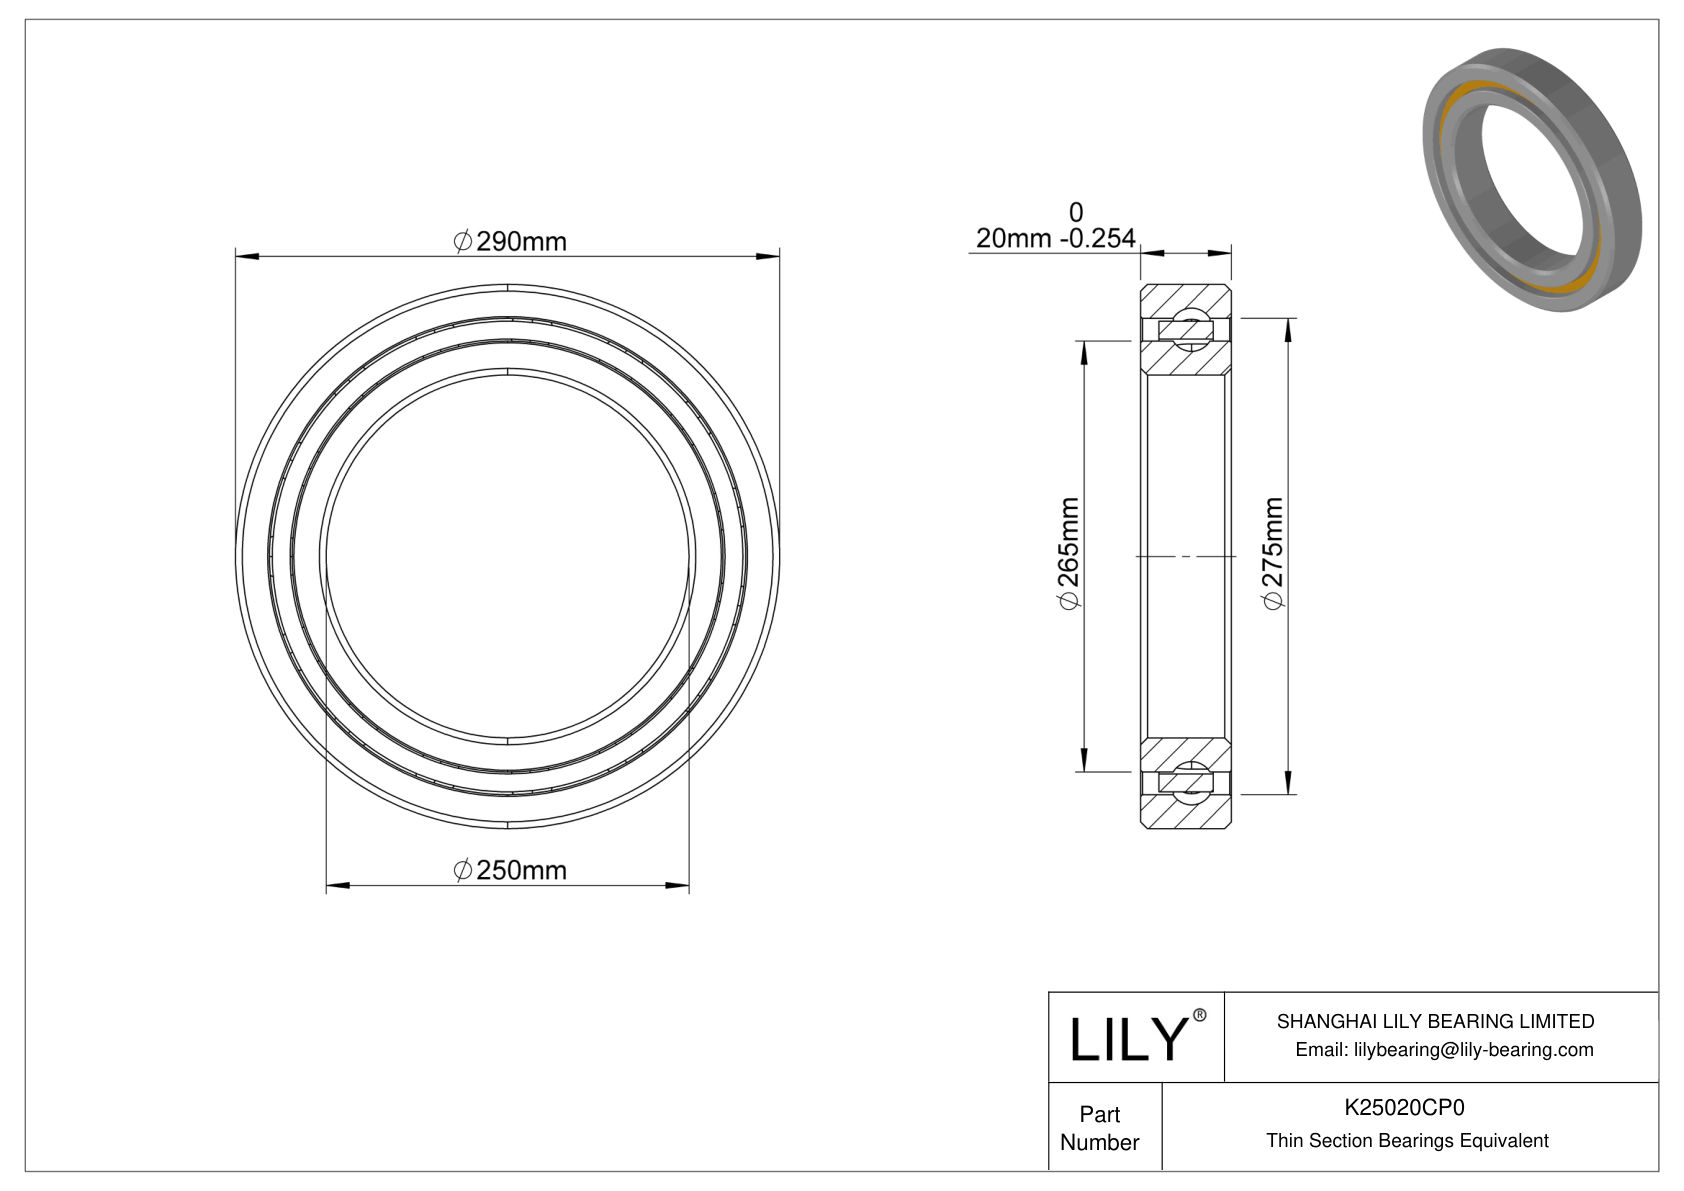 K25020CP0 Constant Section (CS) Bearings cad drawing